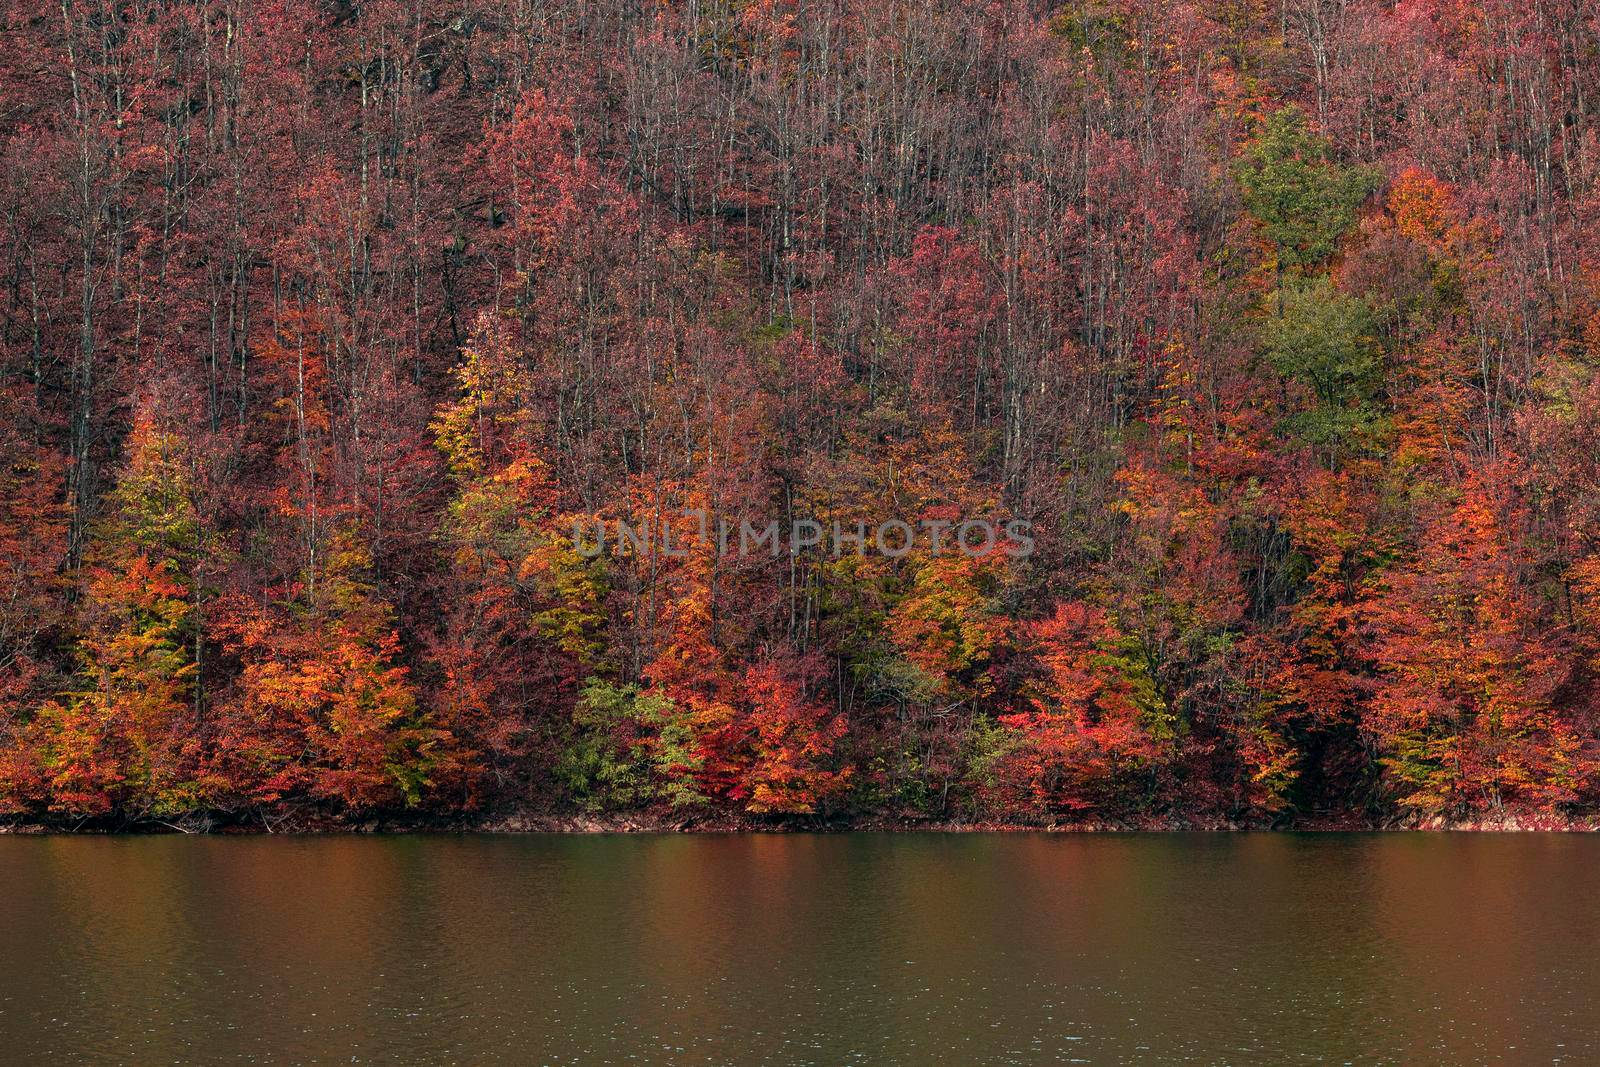 A forest with strong autumn colors near a lake by bybyphotography